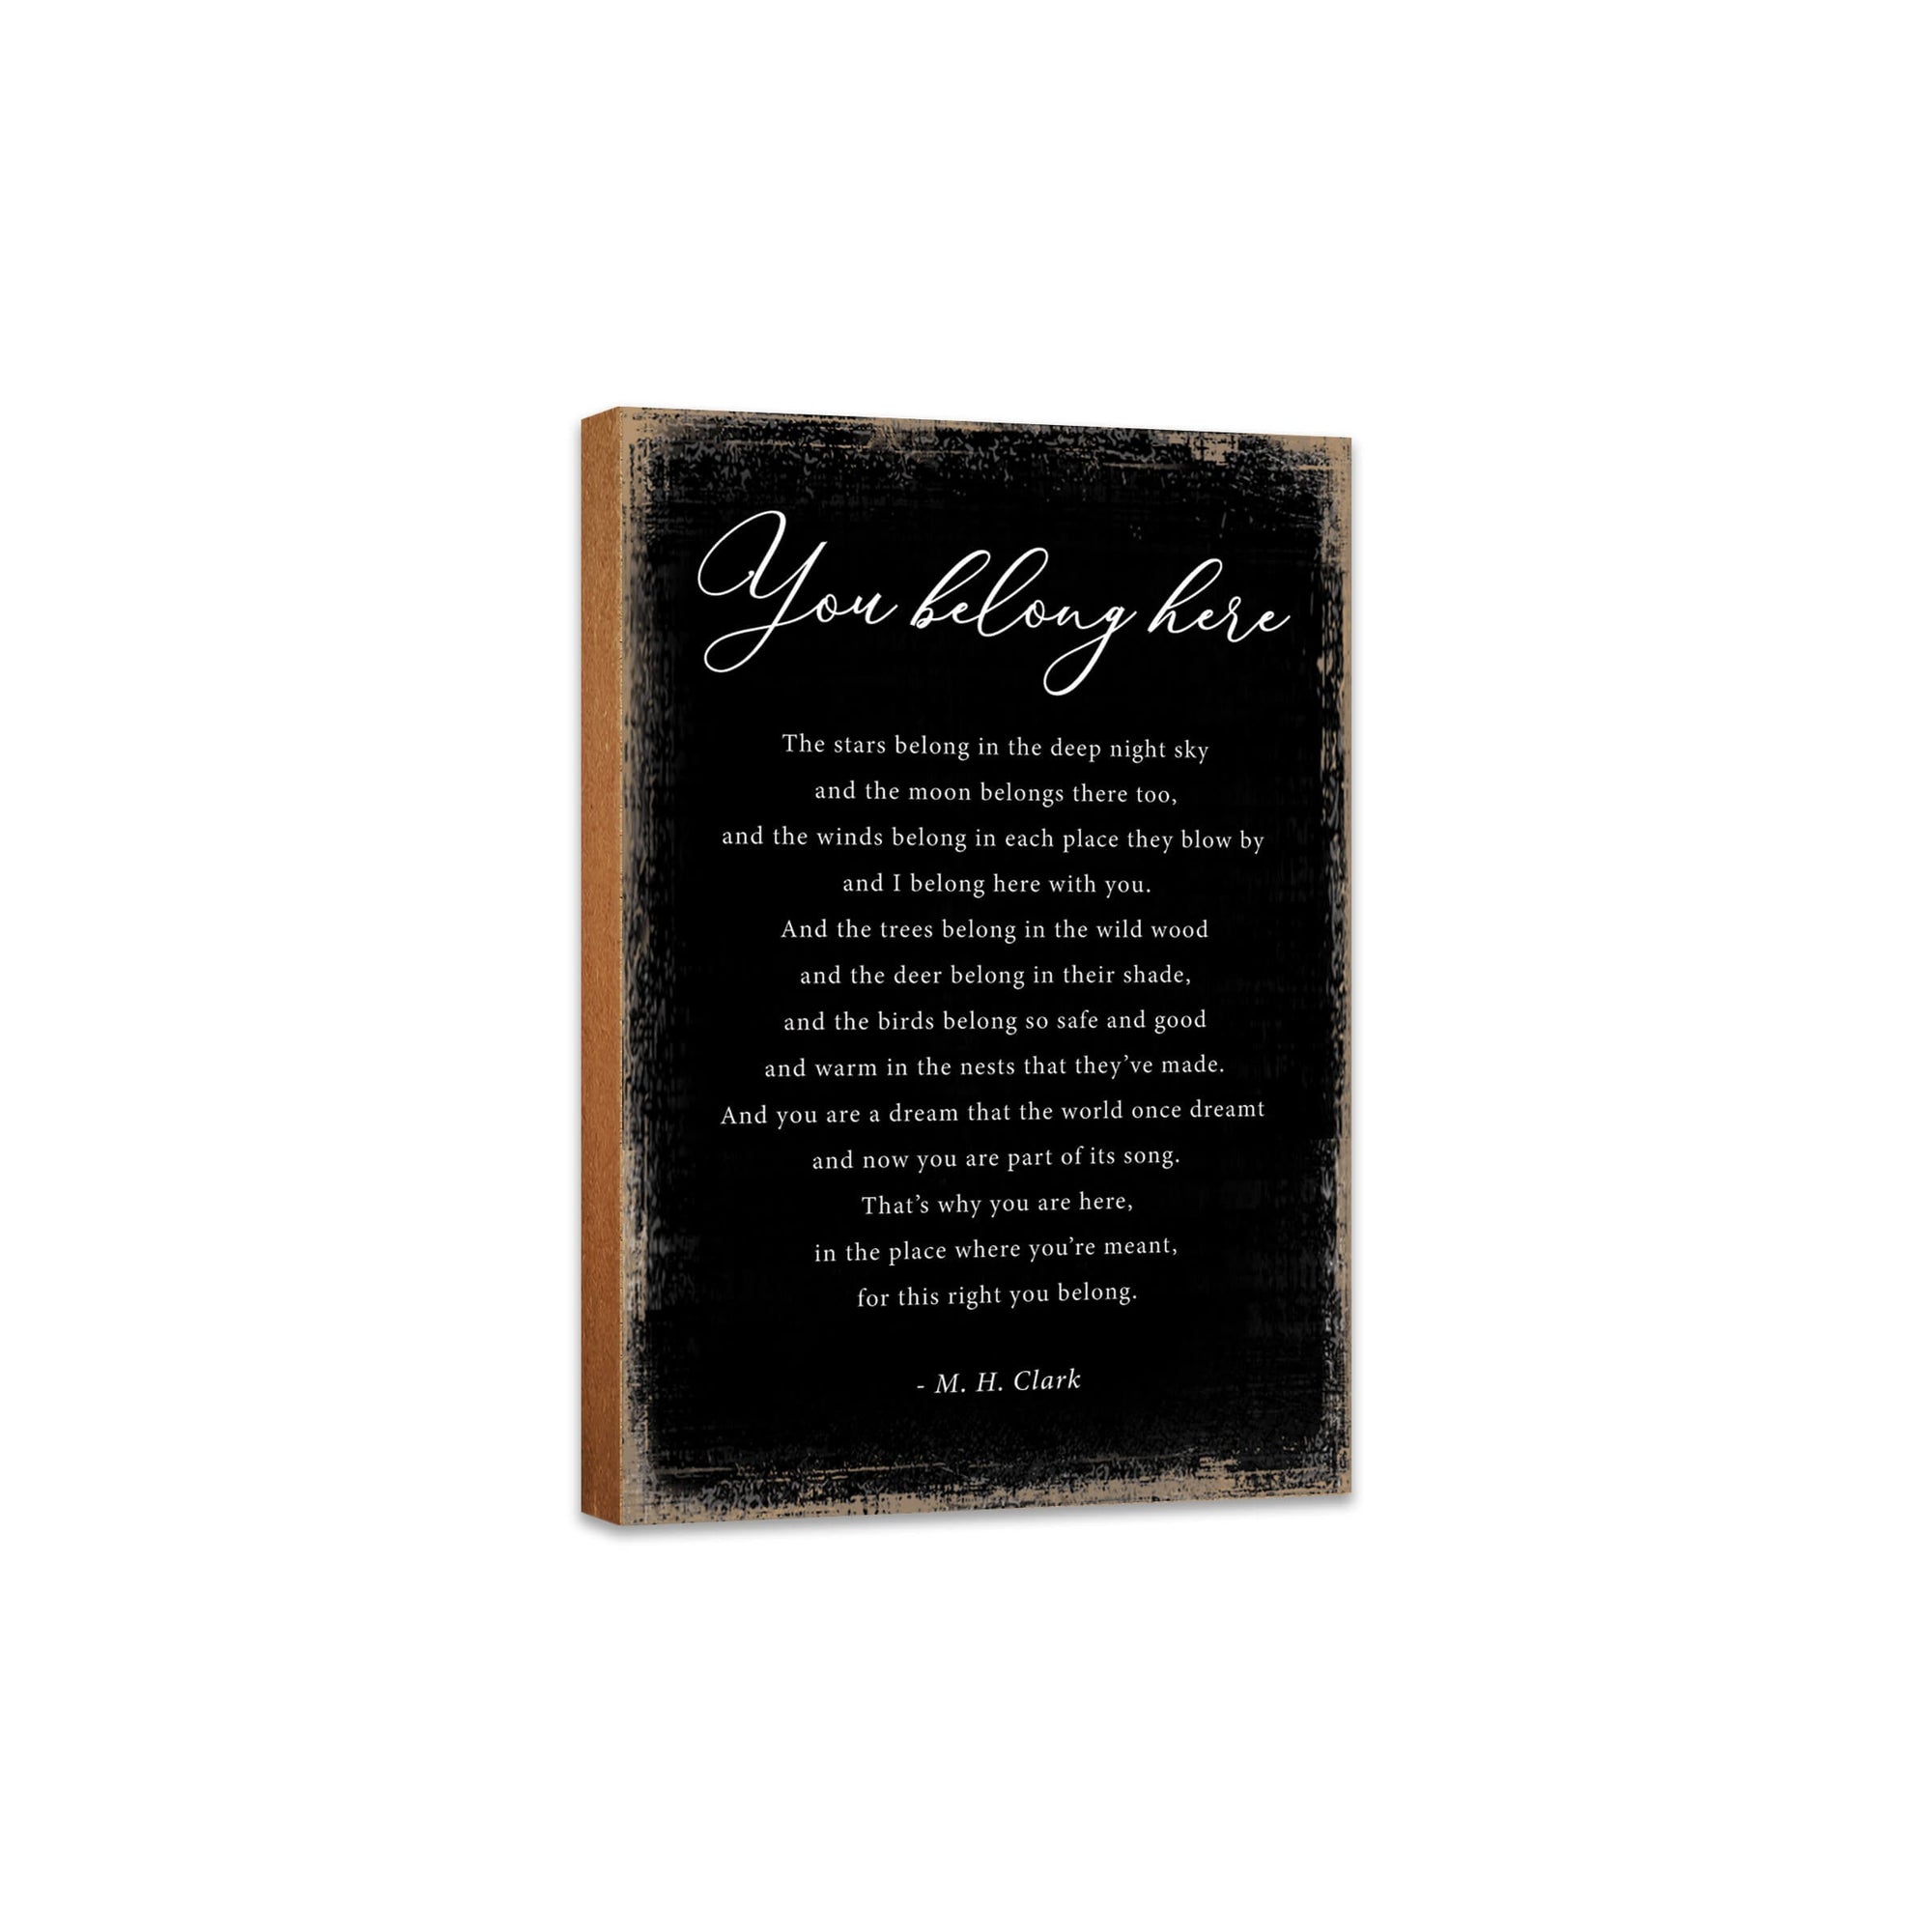 LifeSong Milestones Elegant Wooden Shelf Decor - Unique Tabletop Signs Gift for Daughter